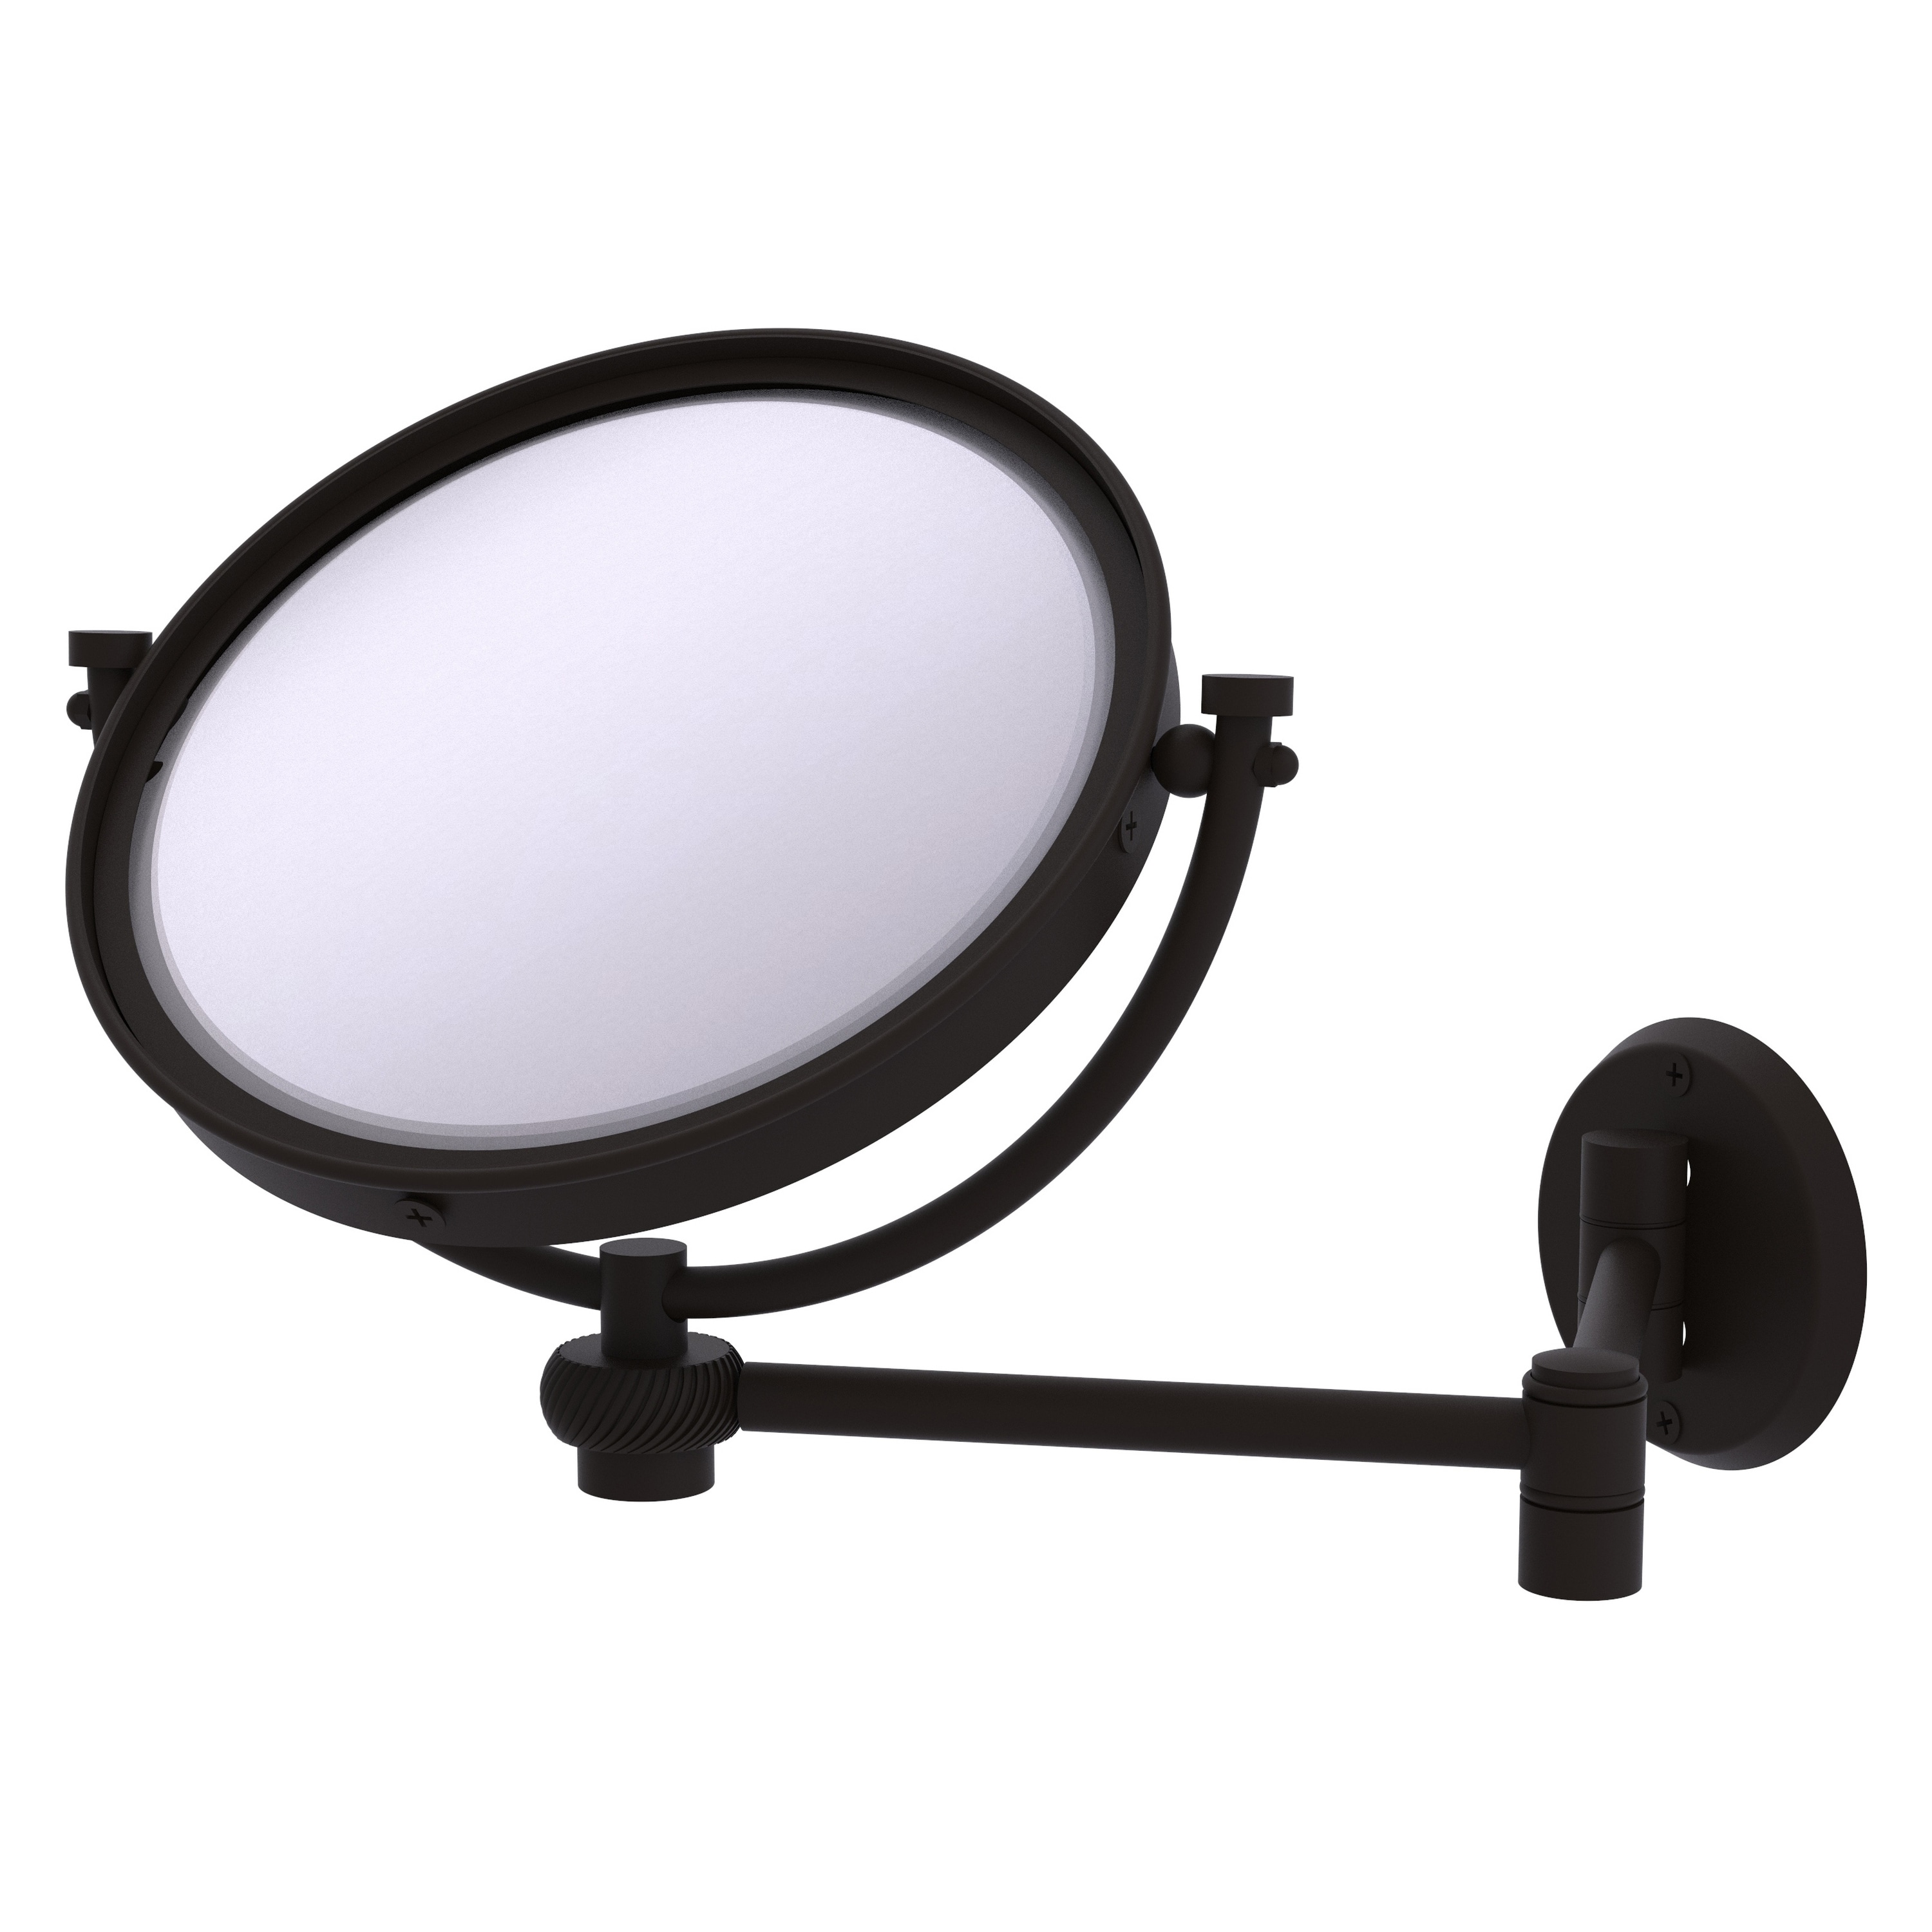 8-in x 14-in Oil-Rubbed Bronze 5X Magnifying Wall-mounted Vanity Mirror | - Allied Brass WM-6T/5X-ORB